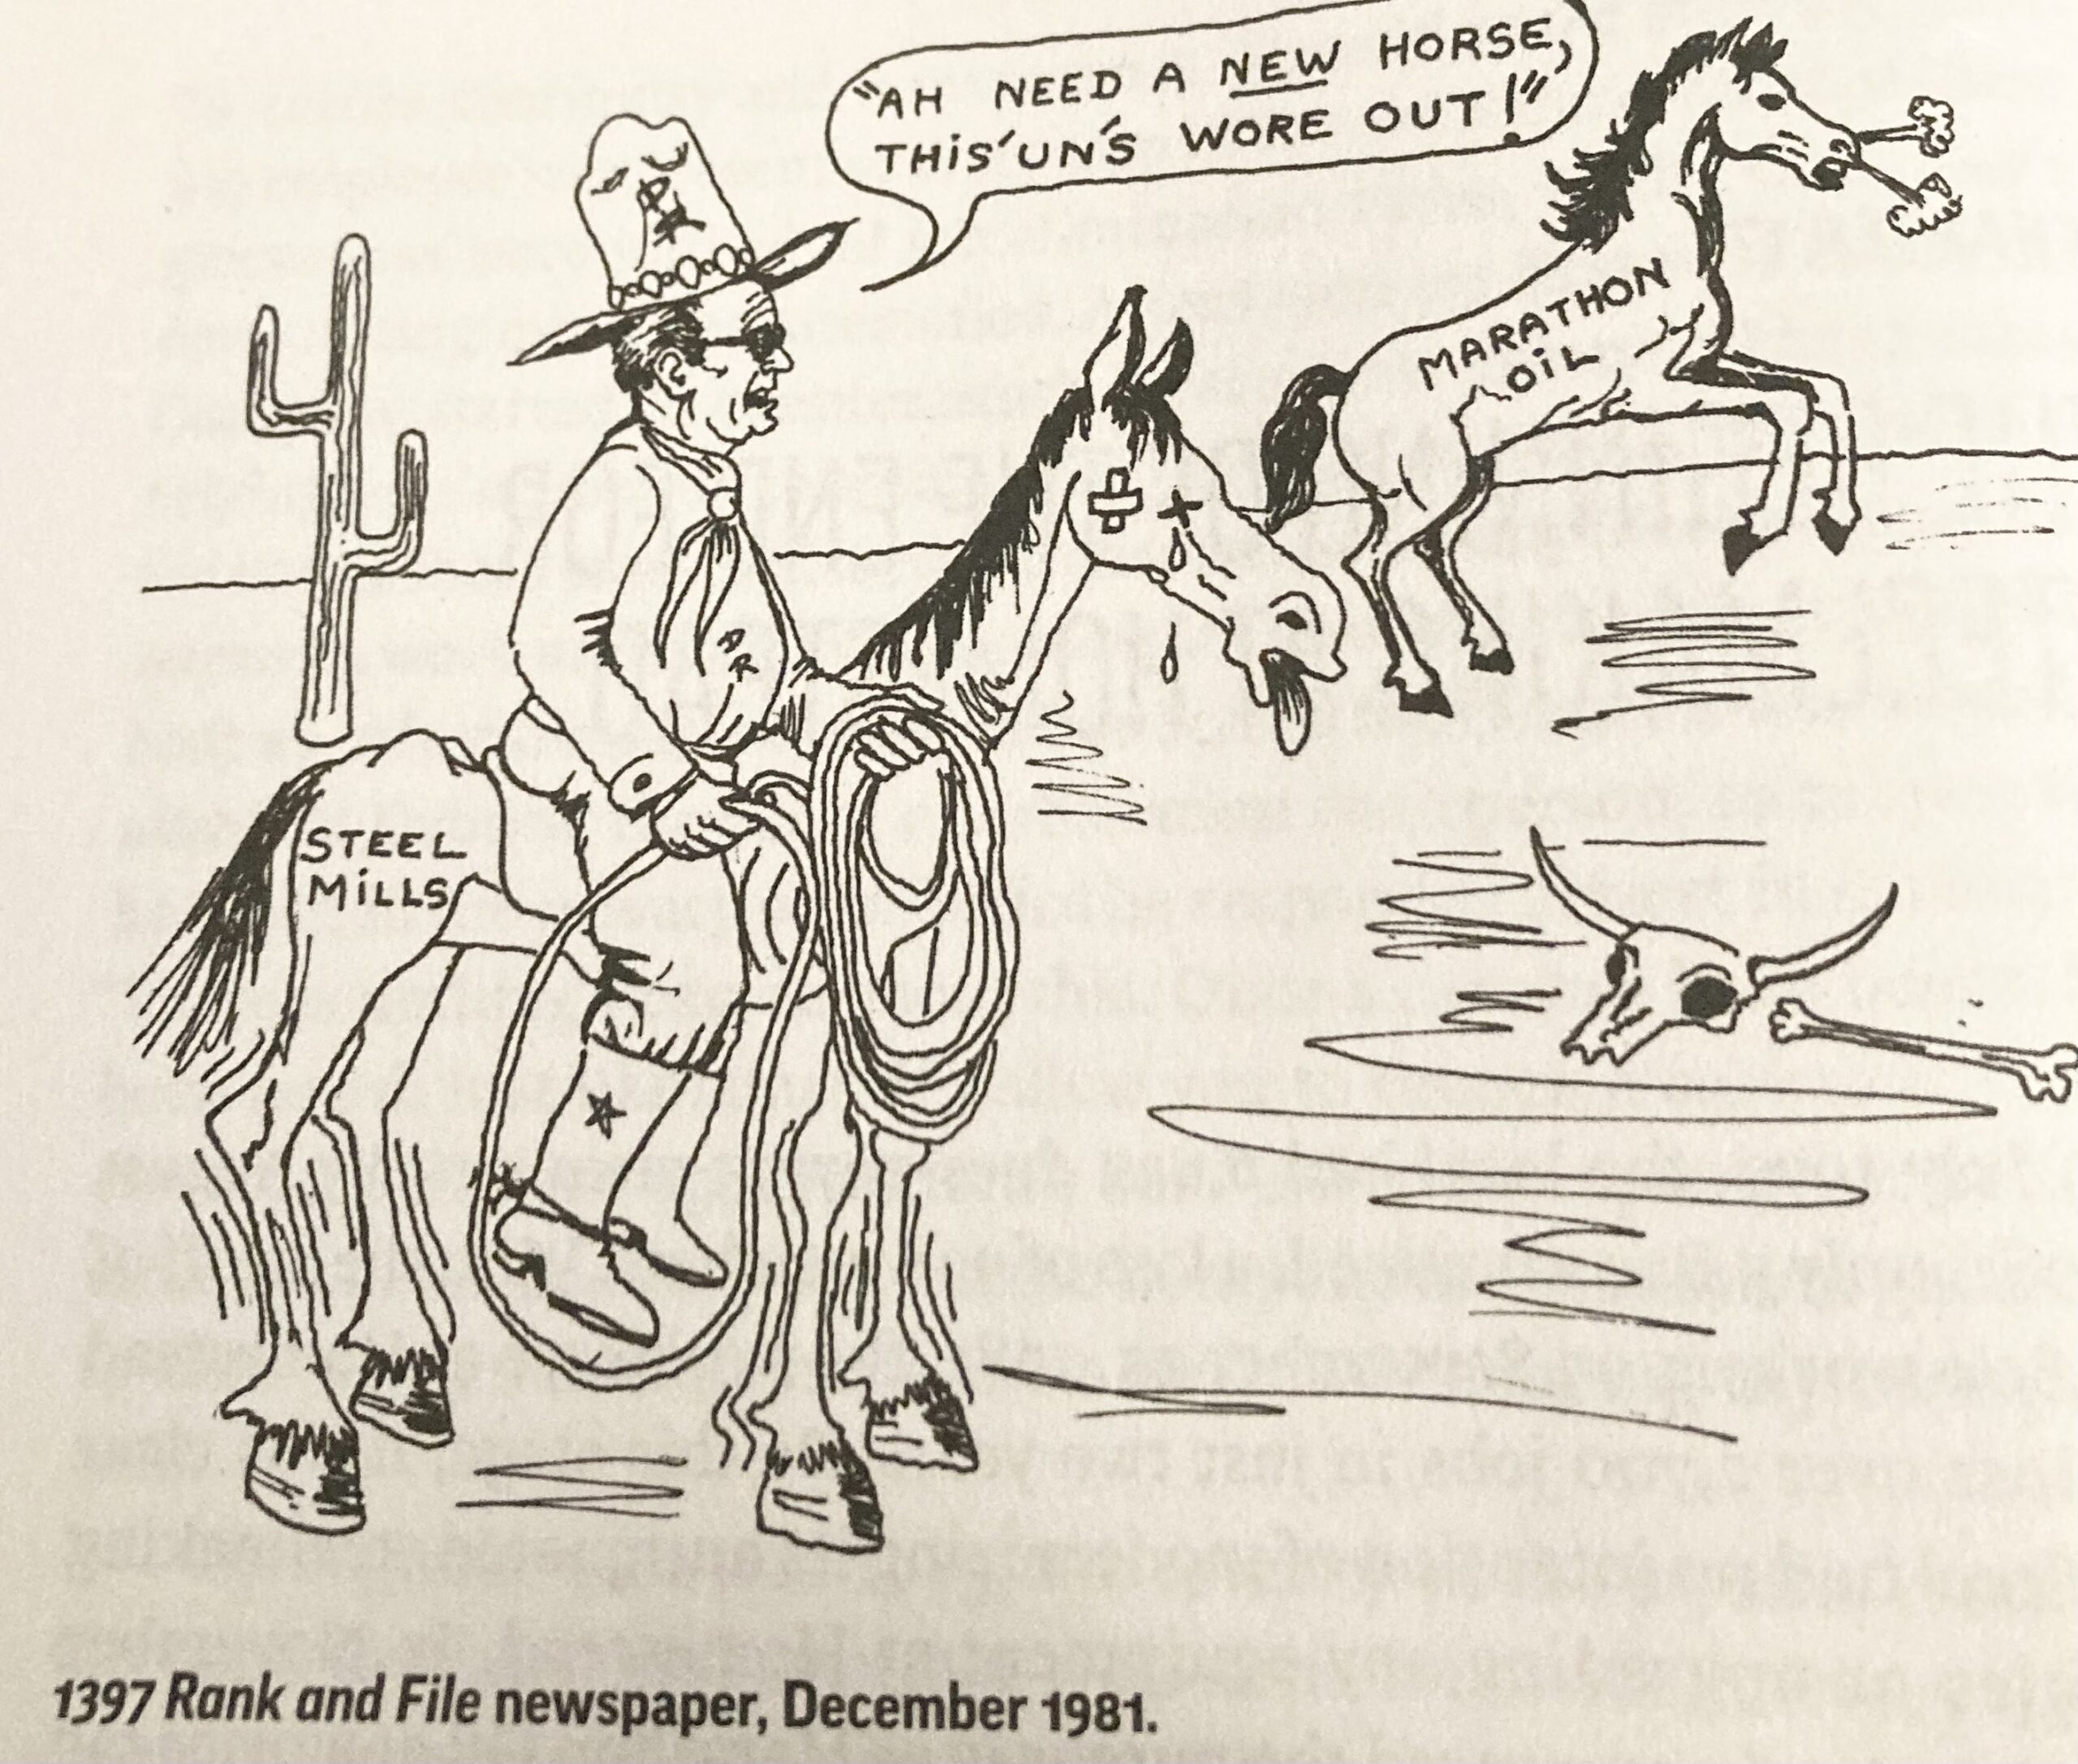 A political cartoon shows two horses in the desert with the horse in the background representing Marathon Oil galloping freely without a rider while the horse in the foreground is exhausted and the rider of that horse with an abundance of lasso unused is quoted as saying 